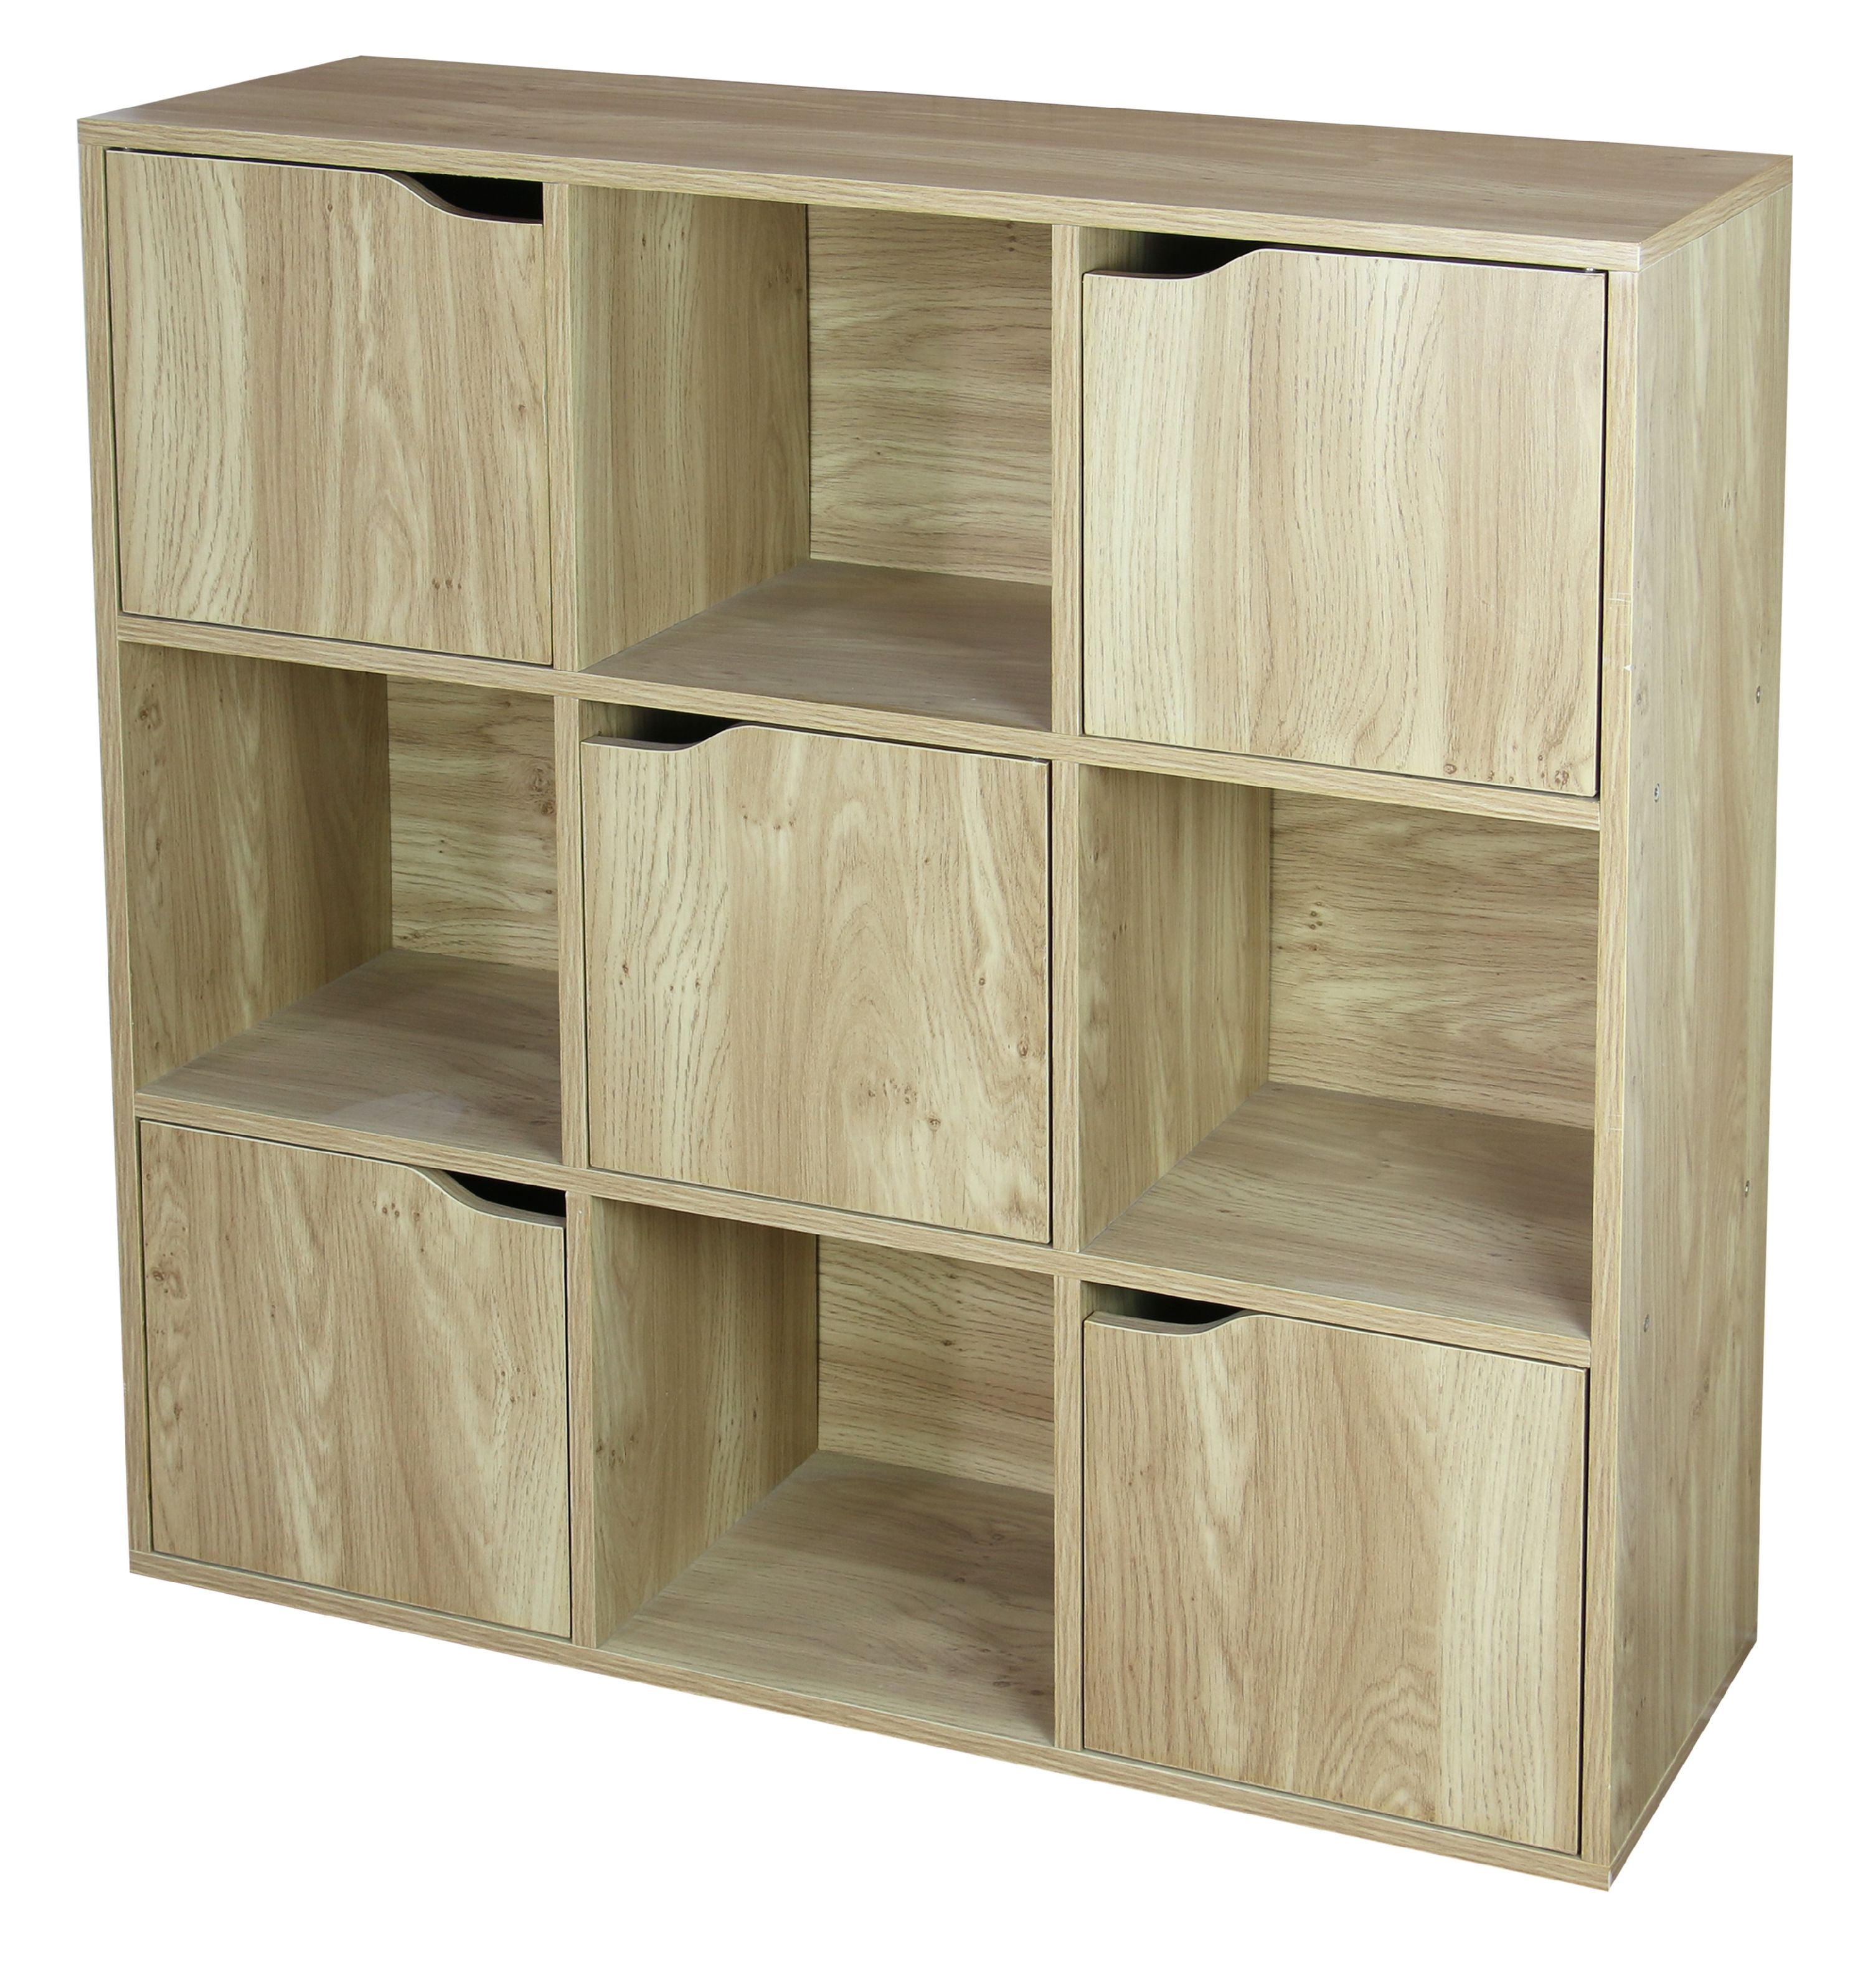 9 Cube Wood Storage Shelf With Doors, Wooden Cubby Storage Shelves